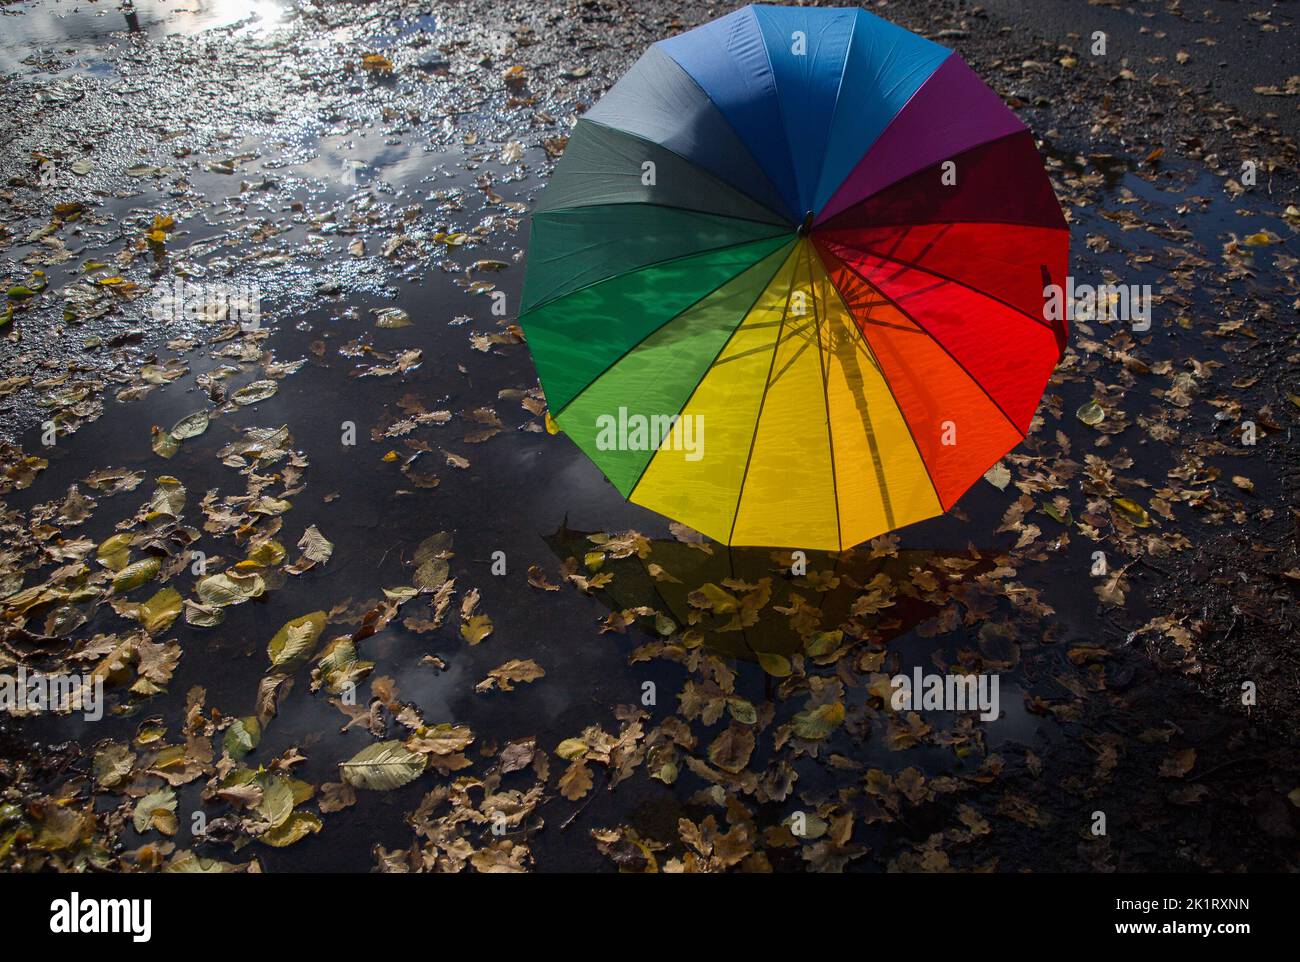 colorful open umbrella of rainbow colors, illuminated by sun, stands on pavement, wet from rain, strewn with yellow leaves. autumn mood. symbol of rai Stock Photo